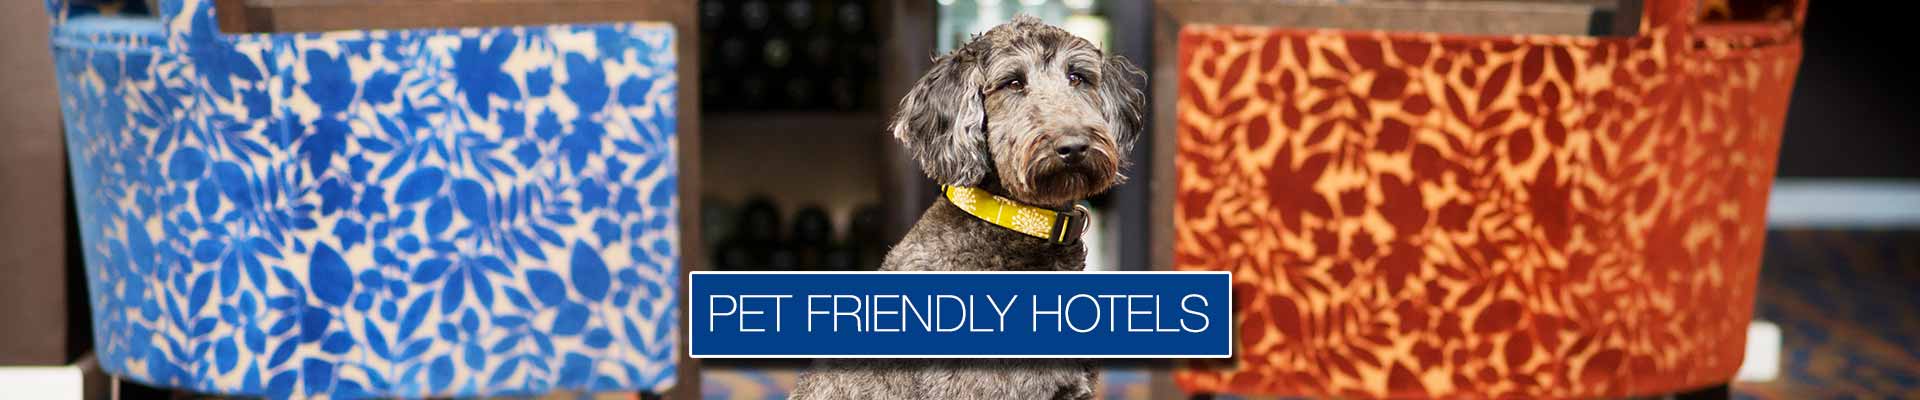 pet-friendly-hotels-that-allow-dogs-cats-best-western-hotels-uk